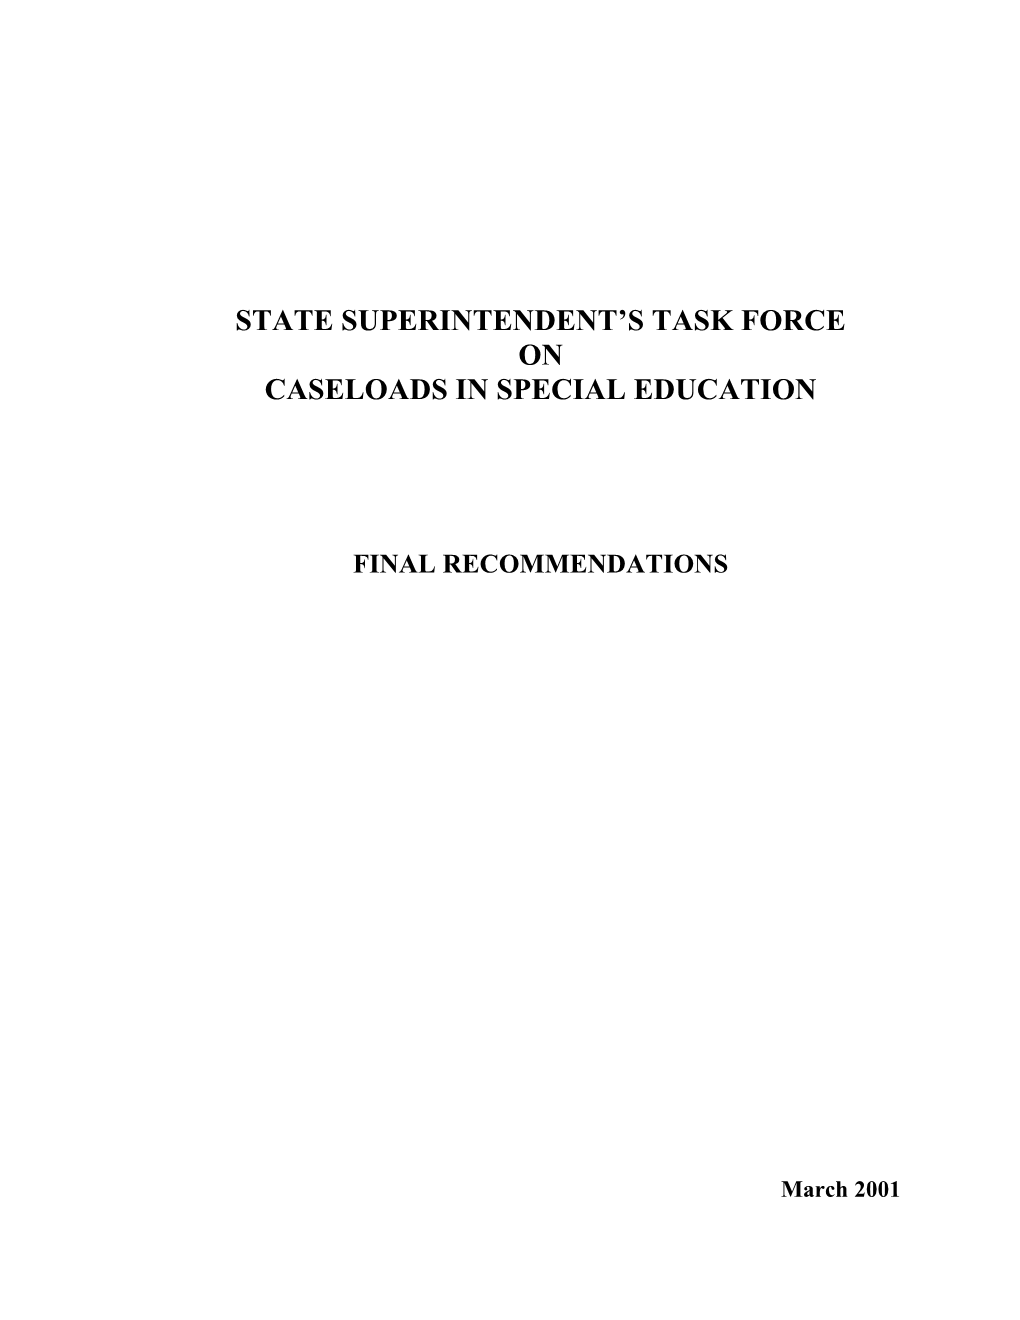 Final Recommendations of the Task Force on Case Loads